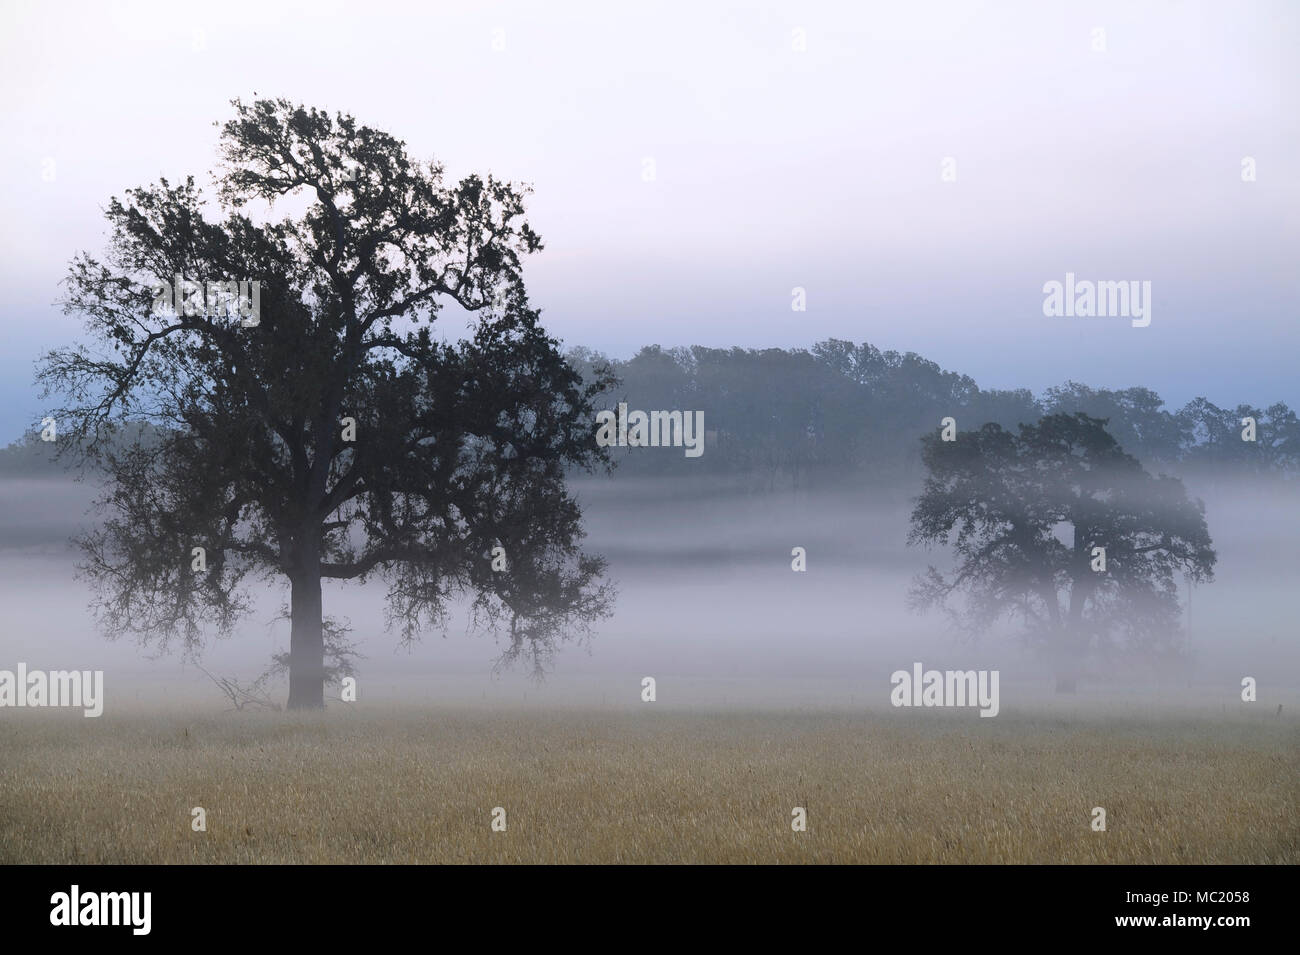 Fog hovers amidst oak trees in an otherwise typical California landscape. Stock Photo